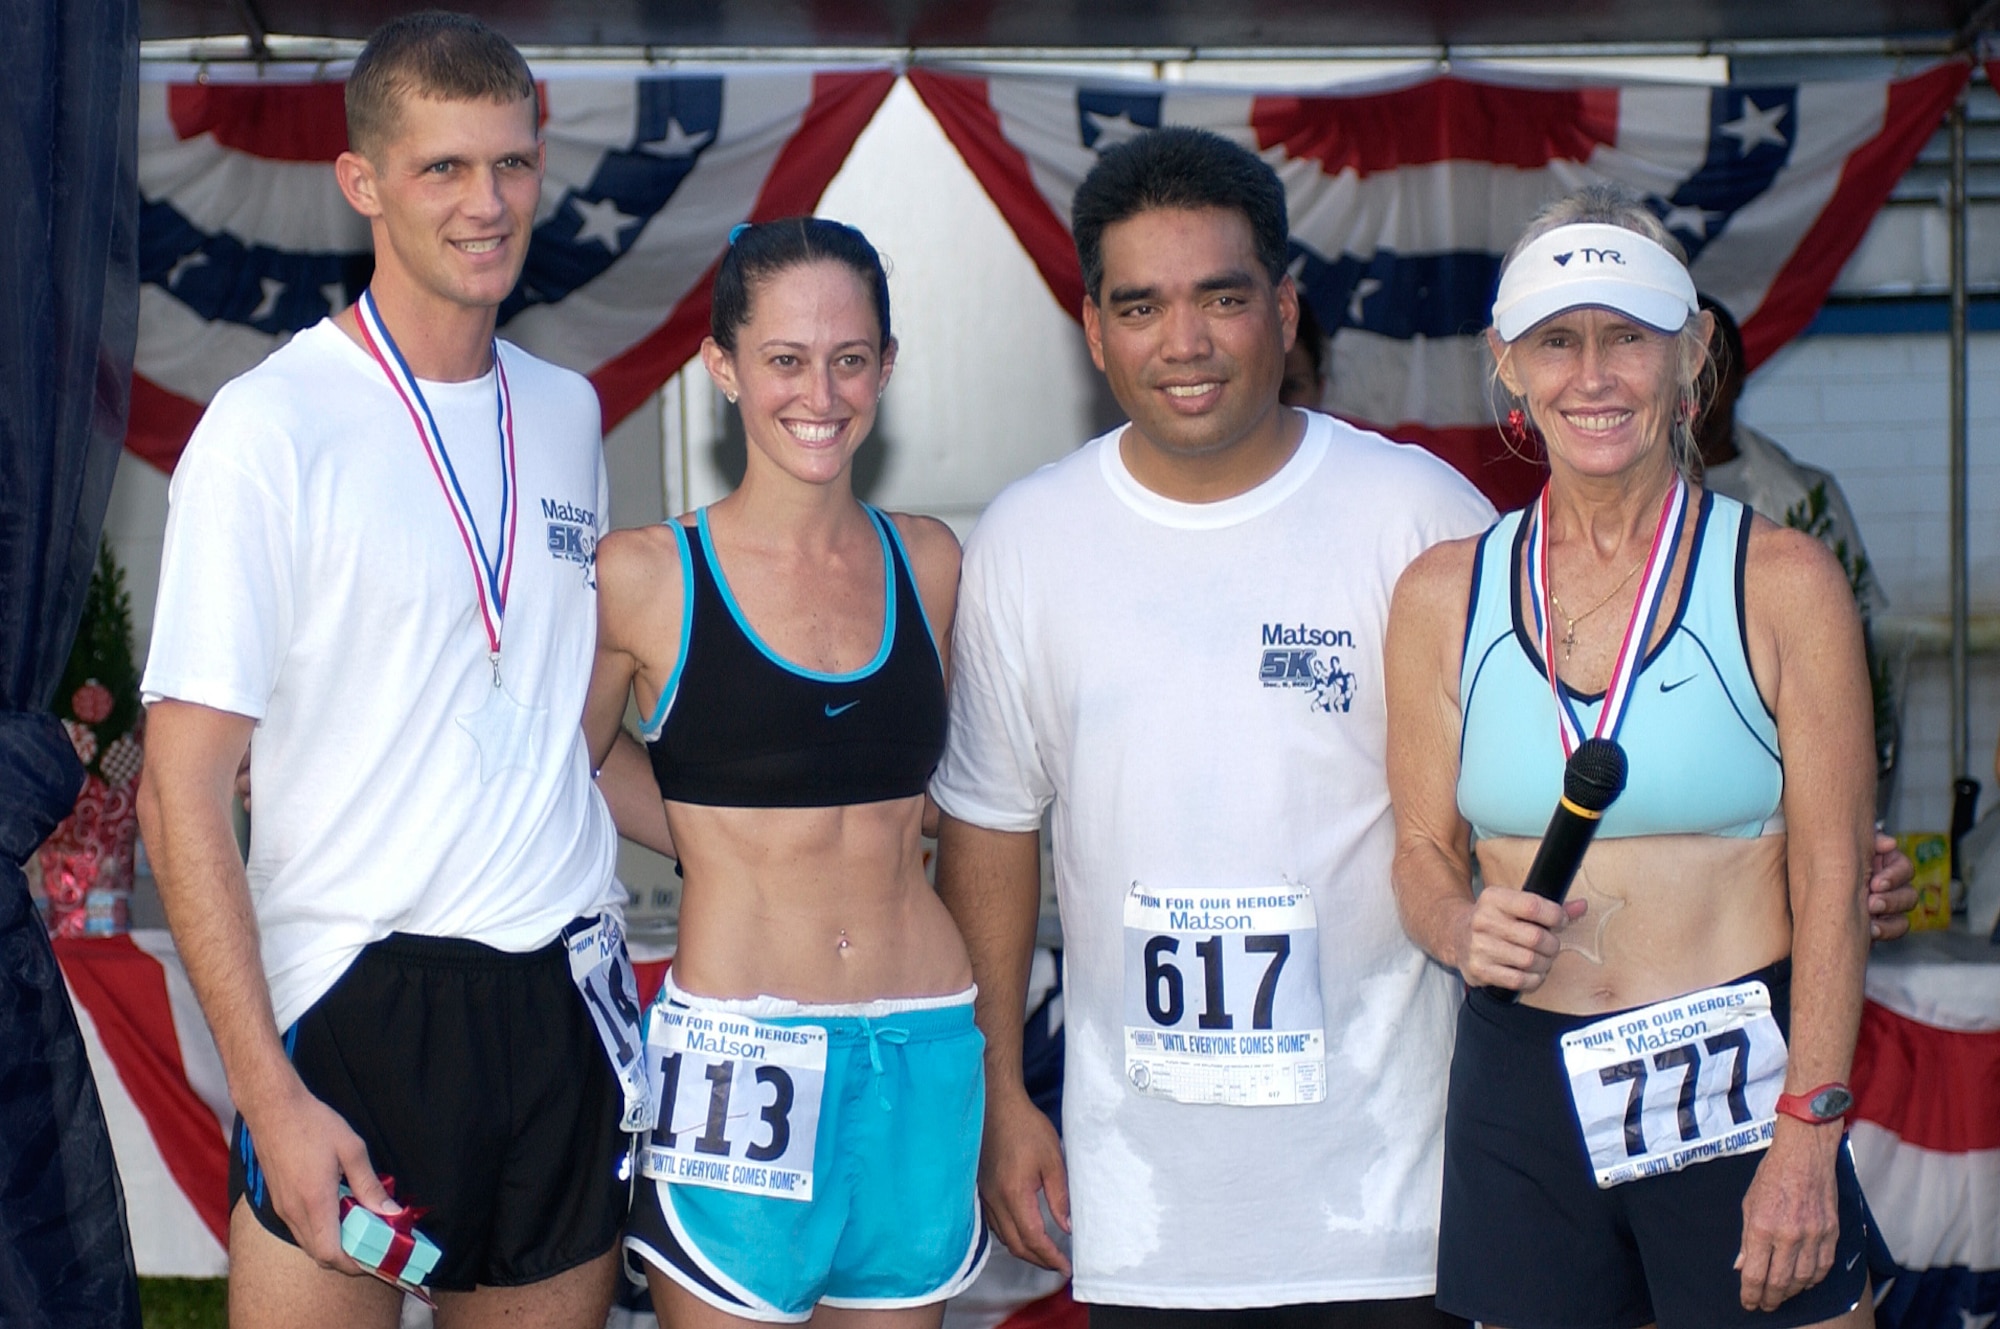 Capt. Michael Lilly (left), 36th Mobility Response Squadron, and Lisa Mason (second from left), Guam's top female runner, were awarded for being the overall first male and female finishers of the race.  (U.S. Air Force photo/Senior Airman Angelique Smythe)